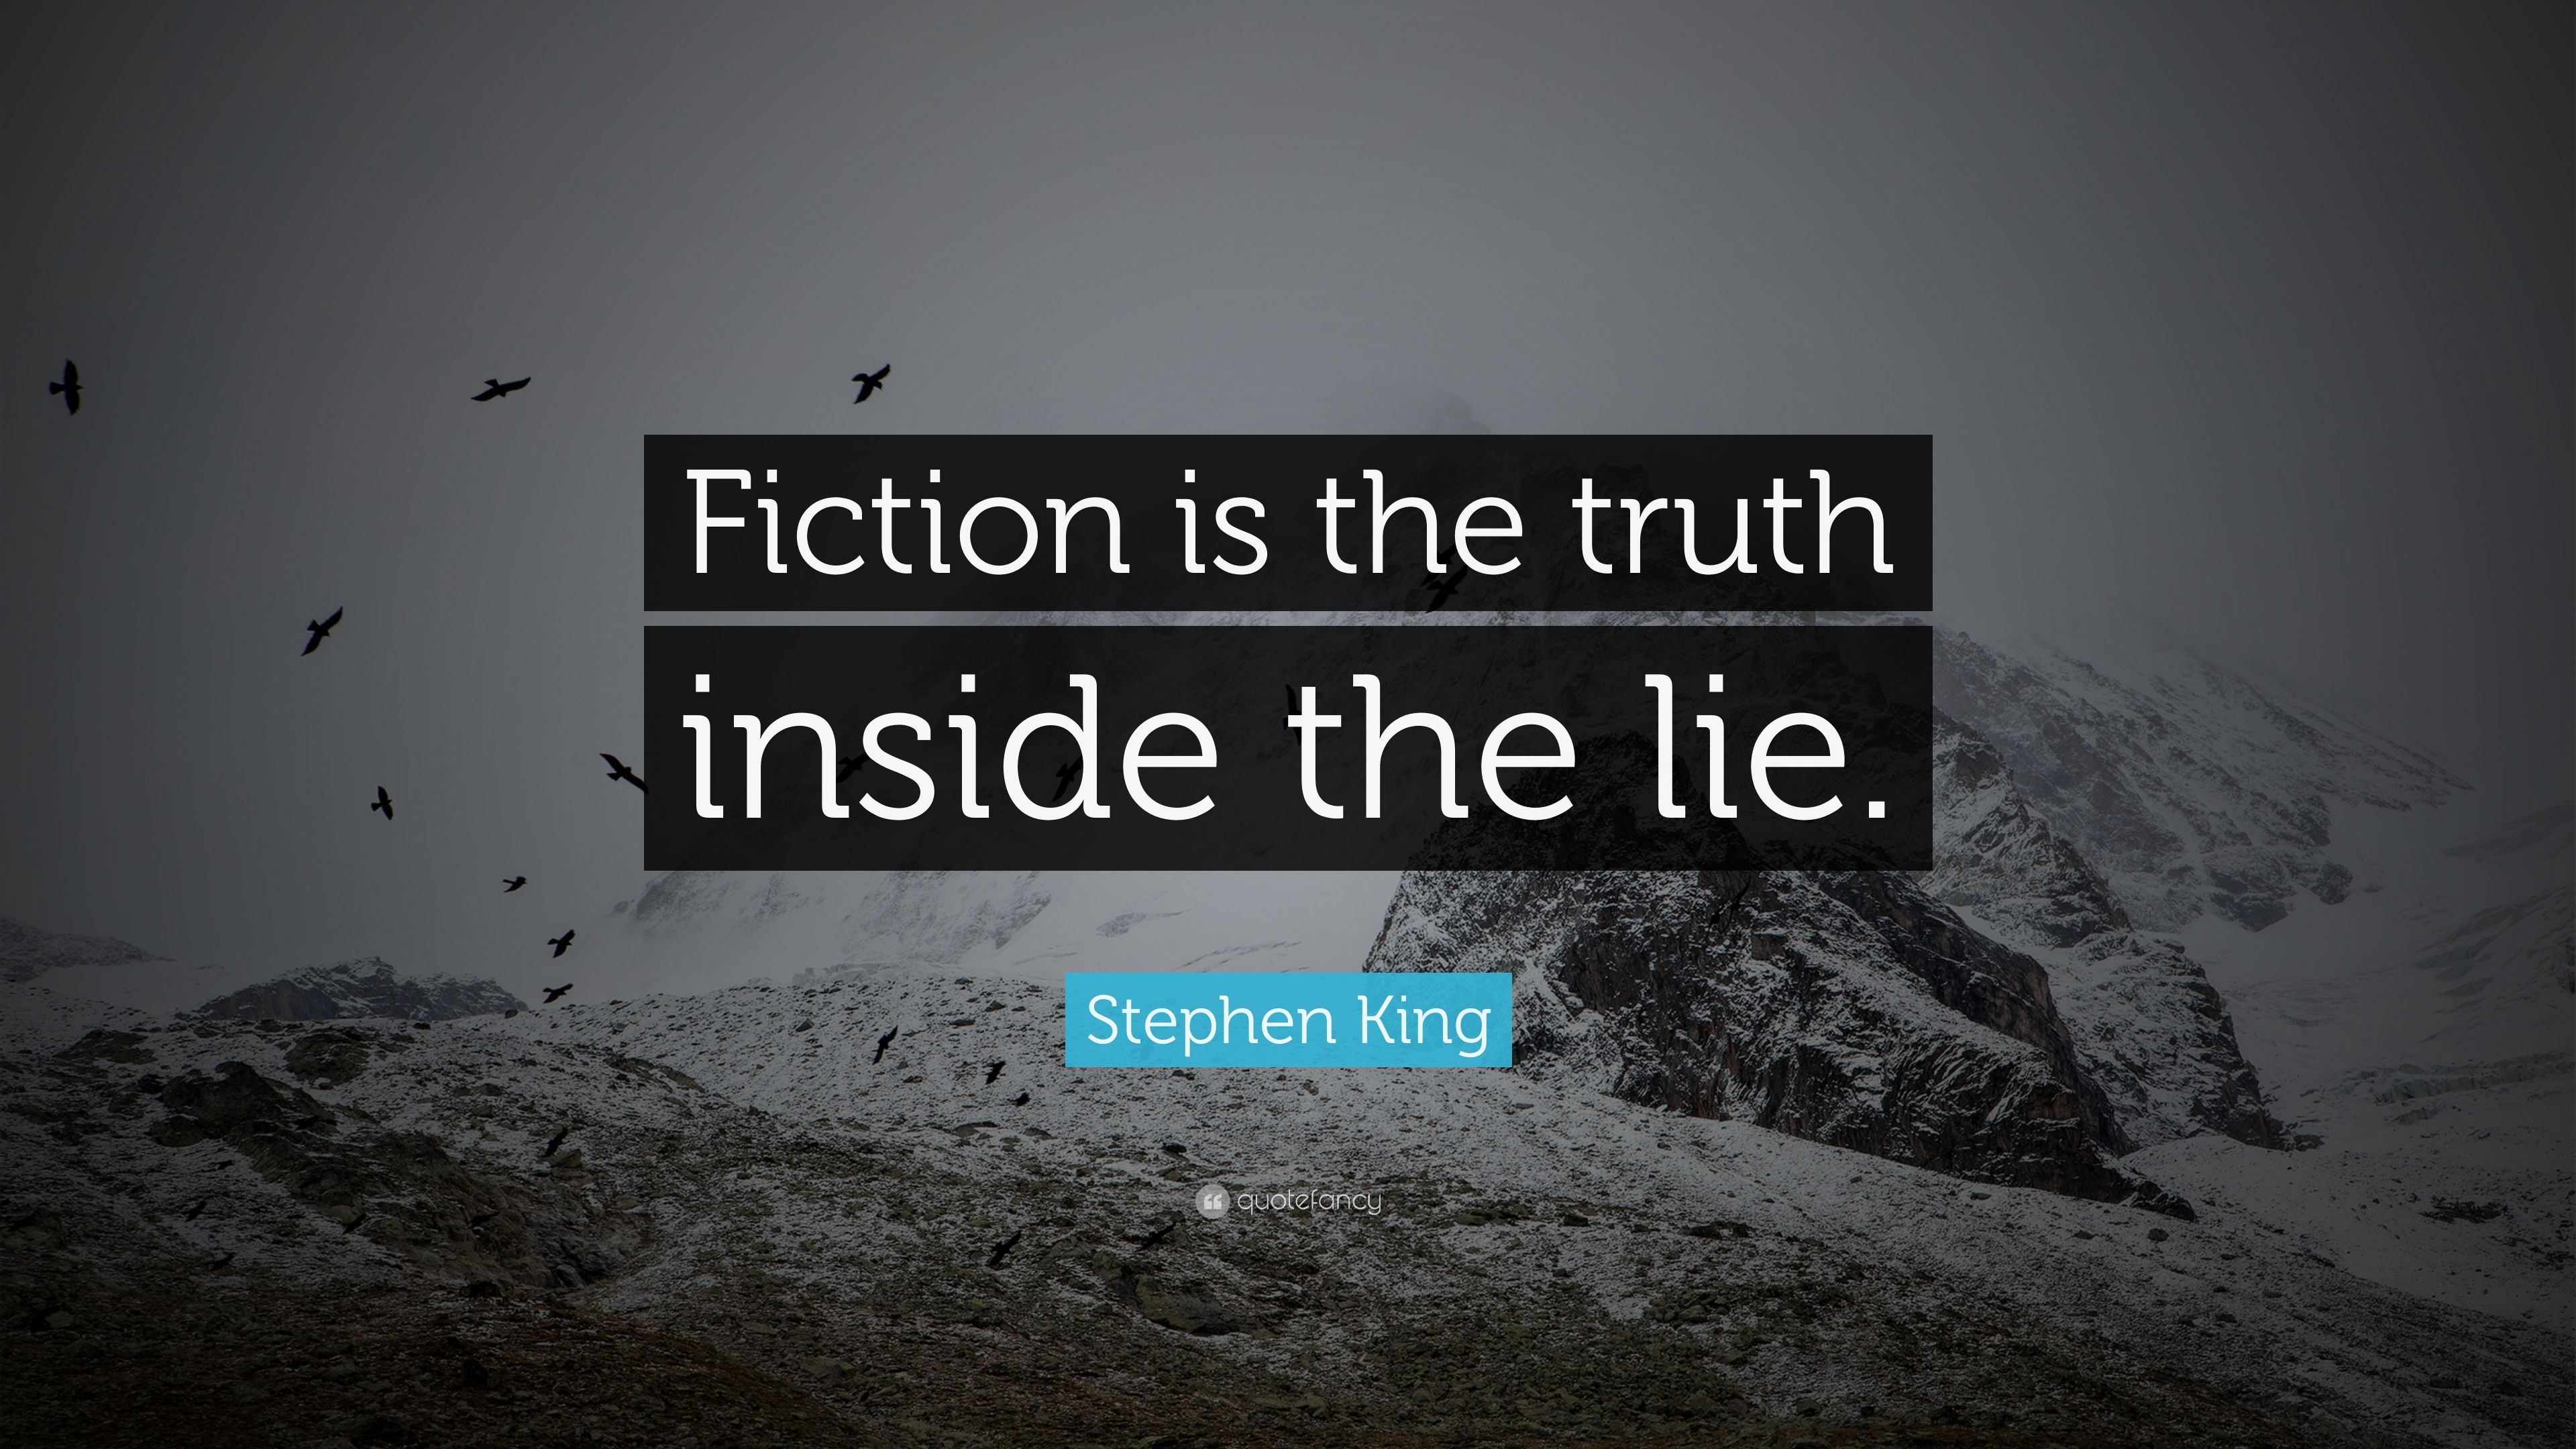 Stephen King Quotes 18 wallpapers - Quotefancy